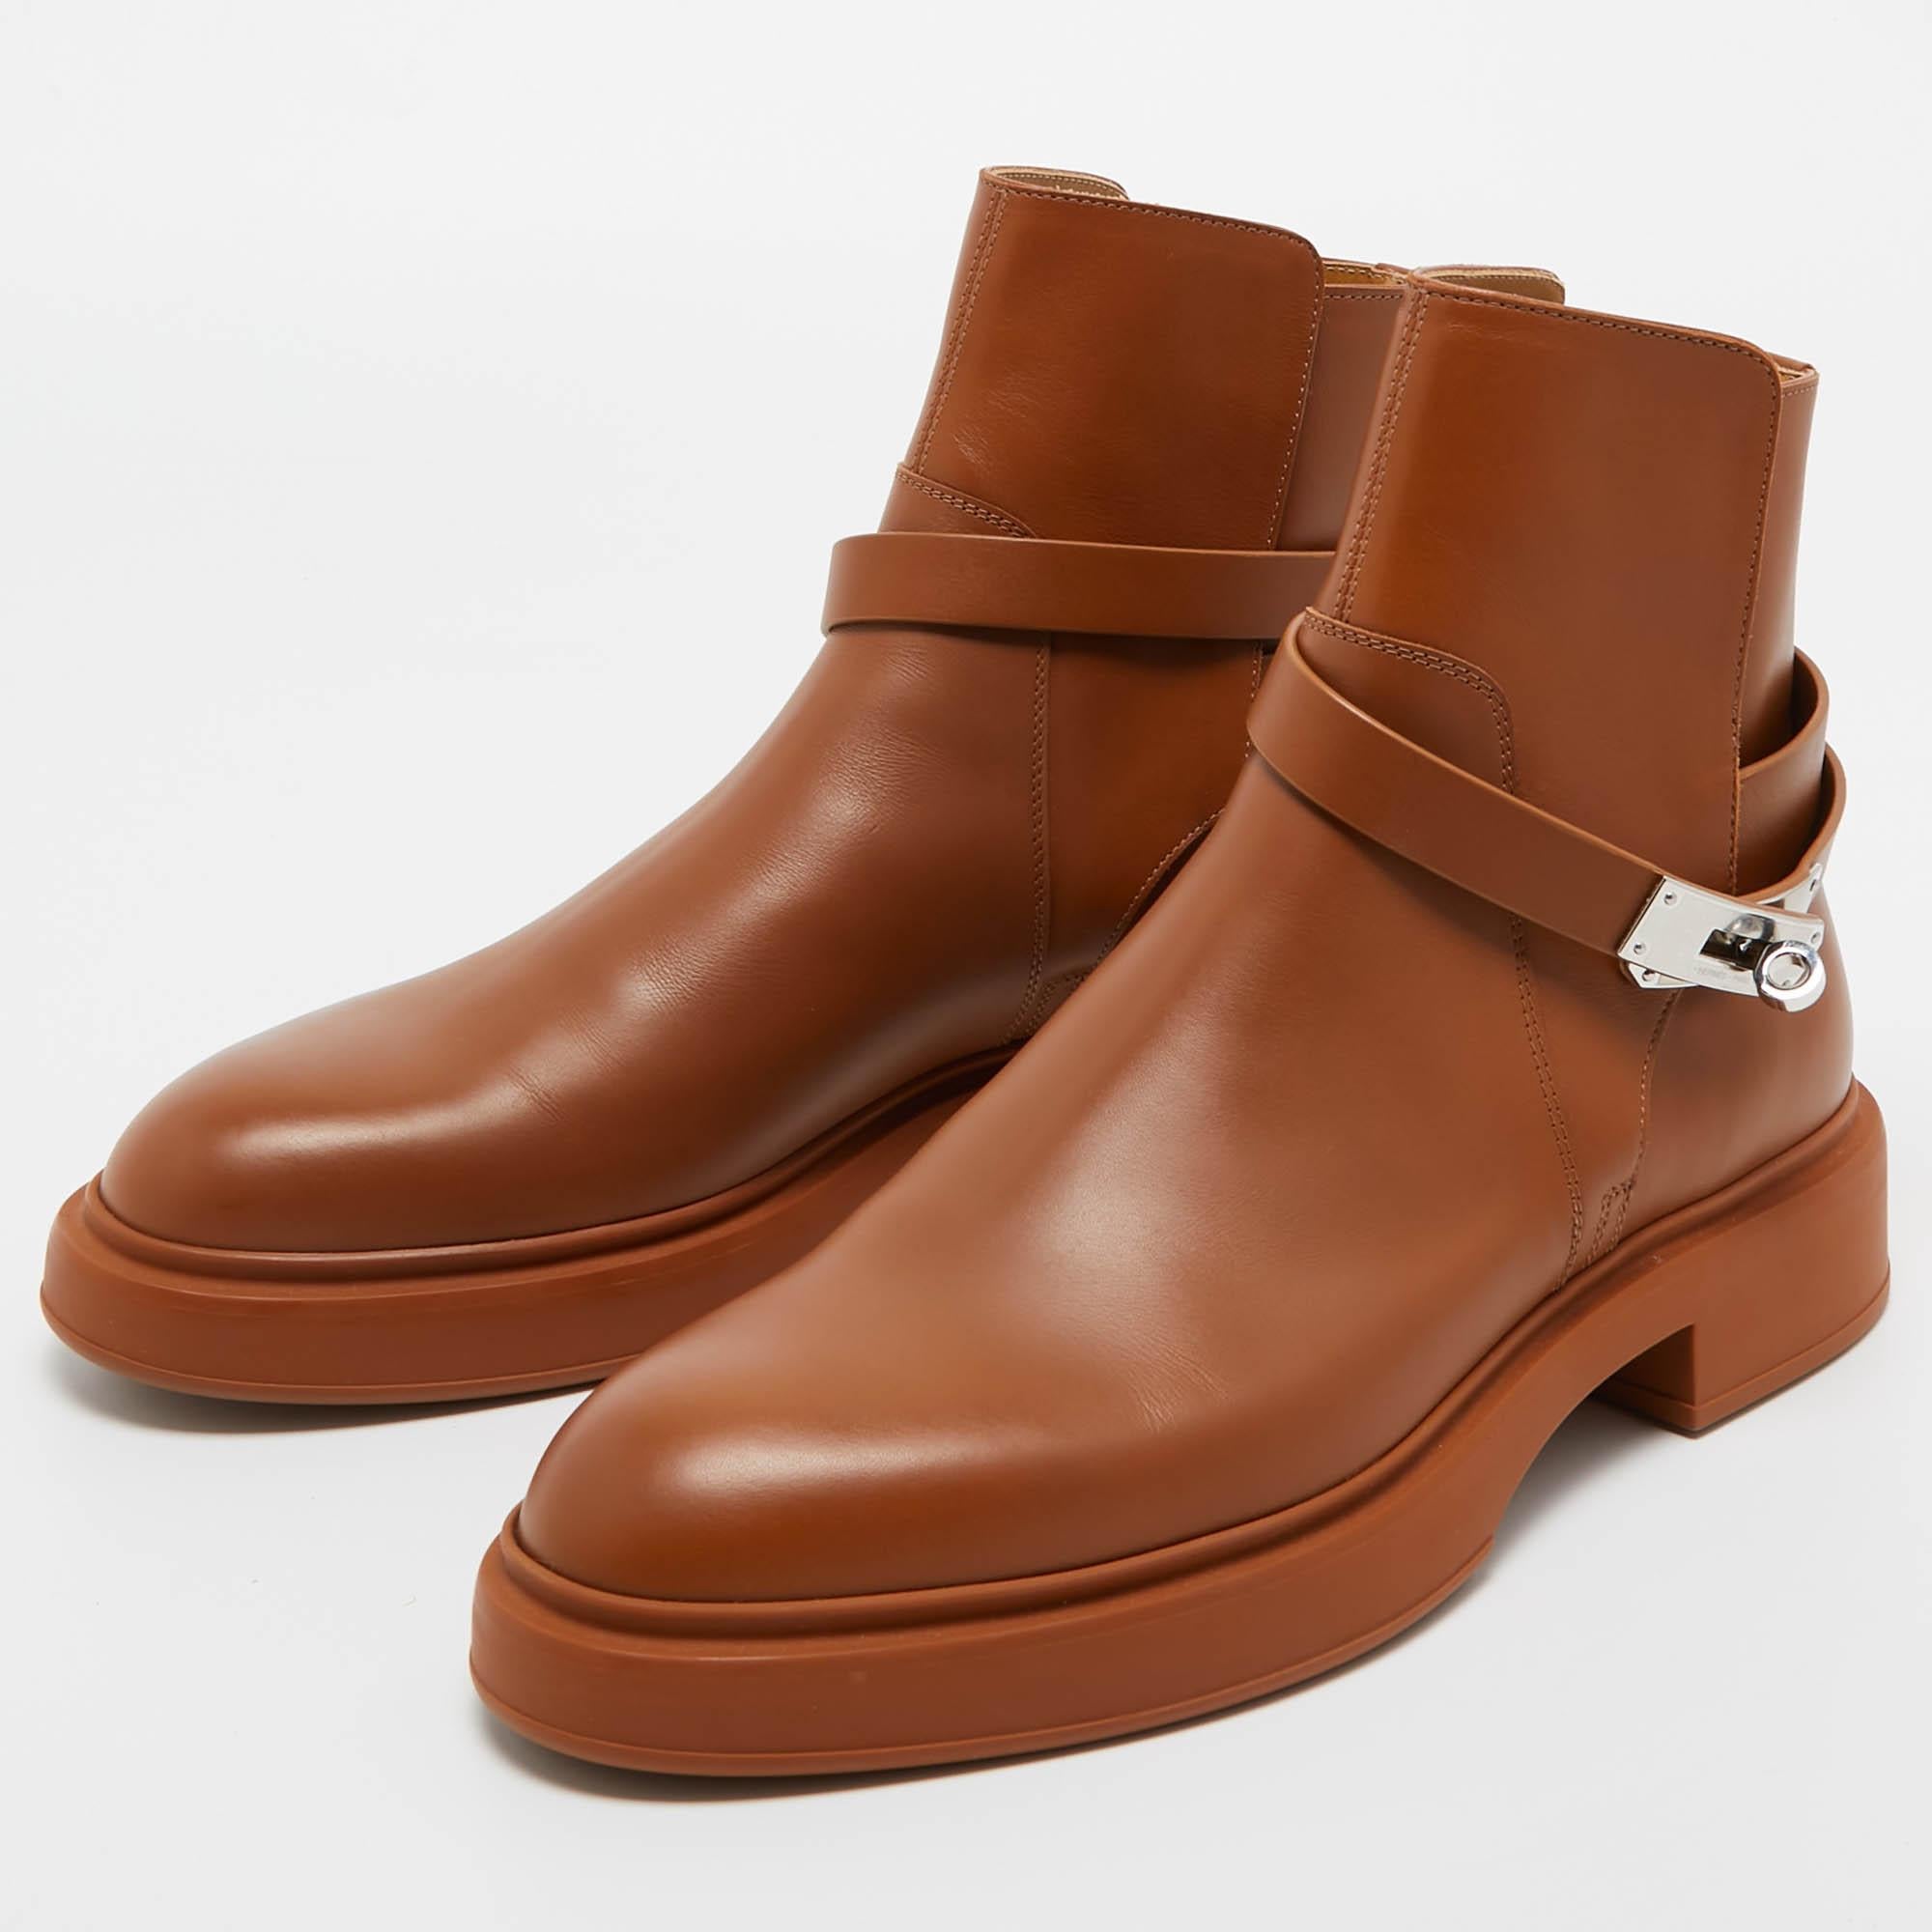 The fashion house’s tradition of excellence, coupled with modern design sensibilities, works to make these Hermes ankle boots a fabulous choice. They'll help you deliver a chic look with ease.

